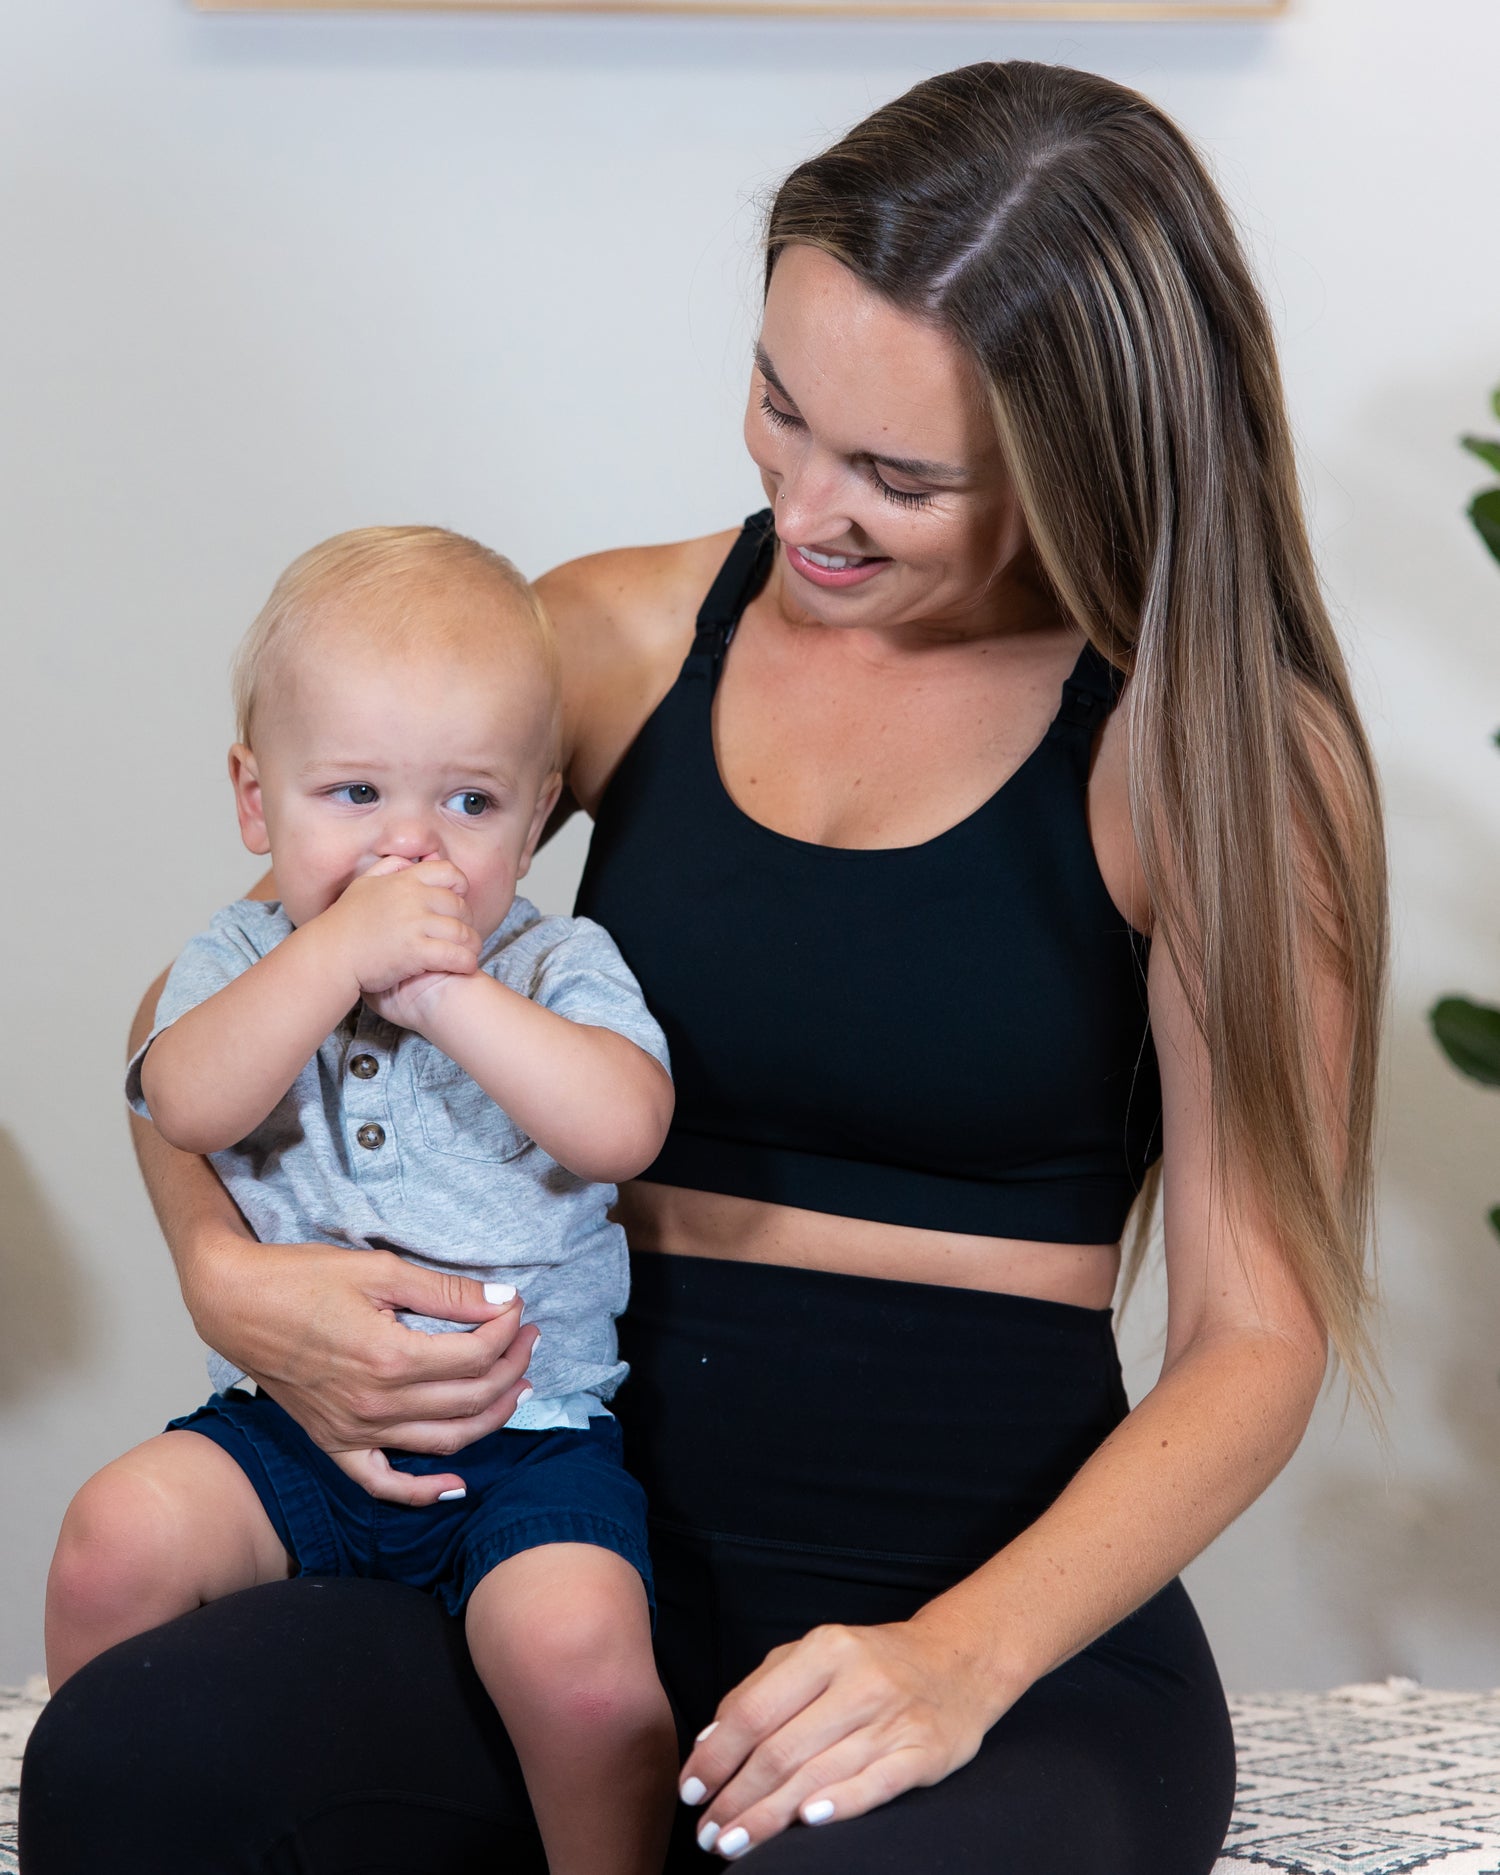 Nursing bras: Comfort and style for new moms